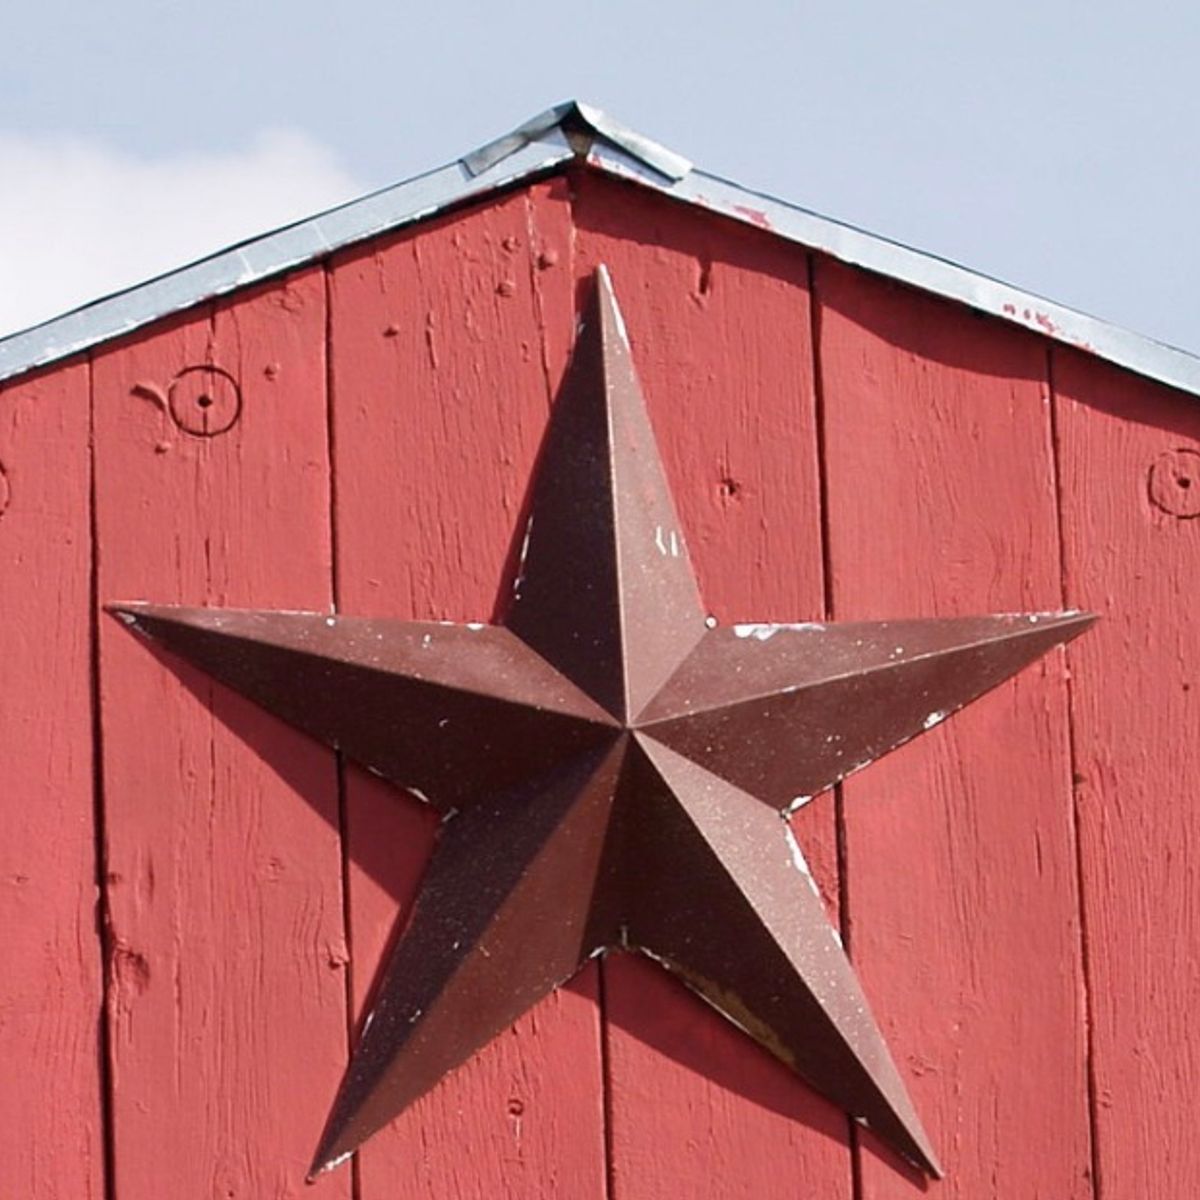 Do Stars on the Sides of Homes Indicate the Residents are Swingers? Snopes picture